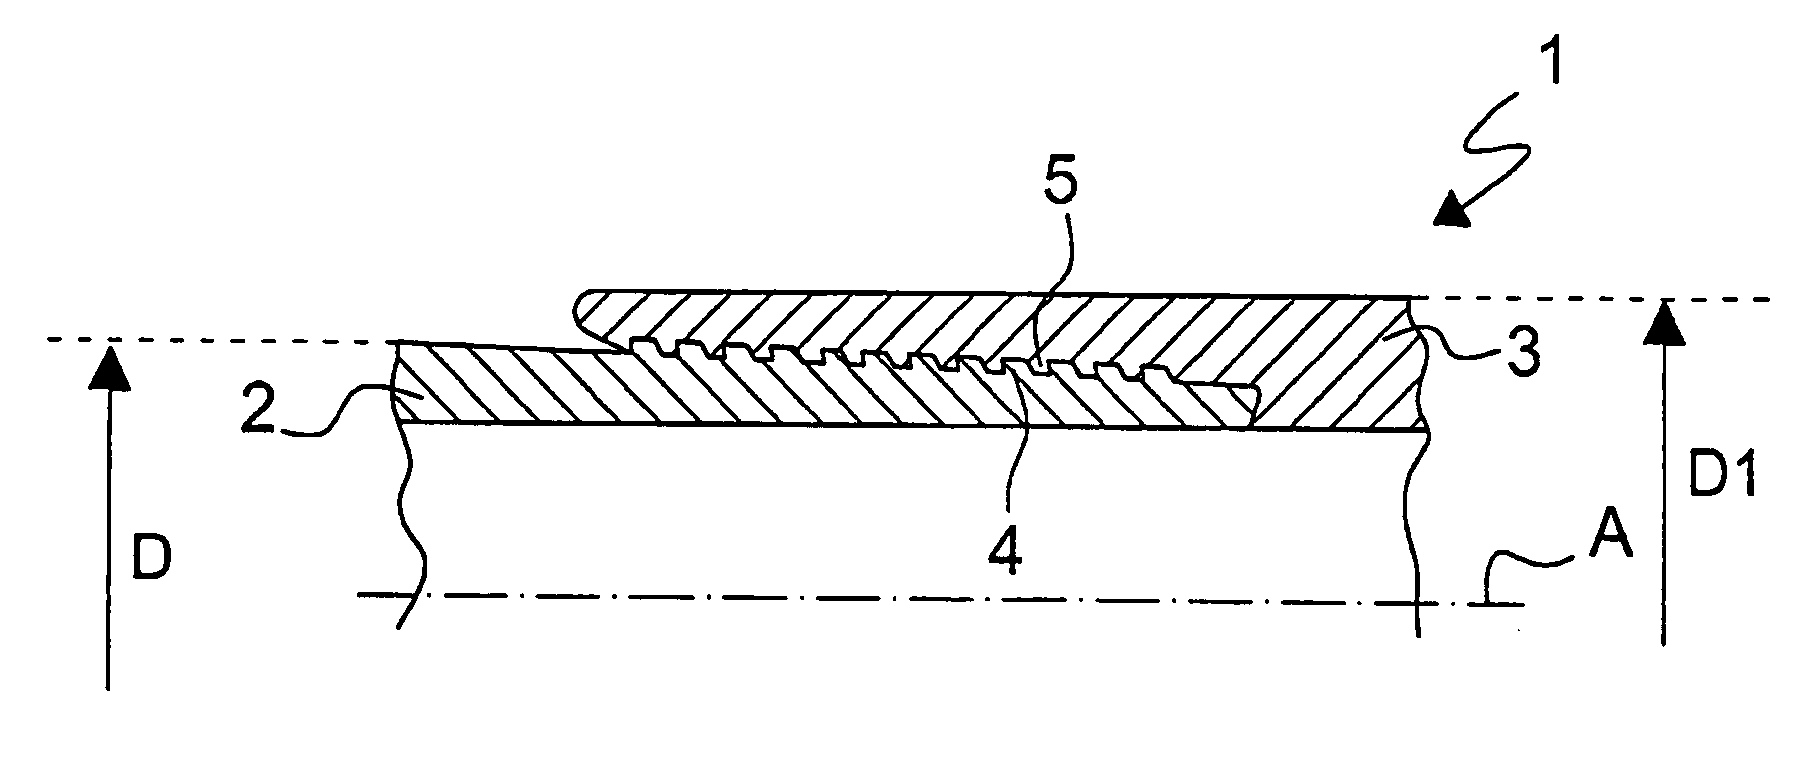 Threaded joint with high radial loads and differentially treated surfaces